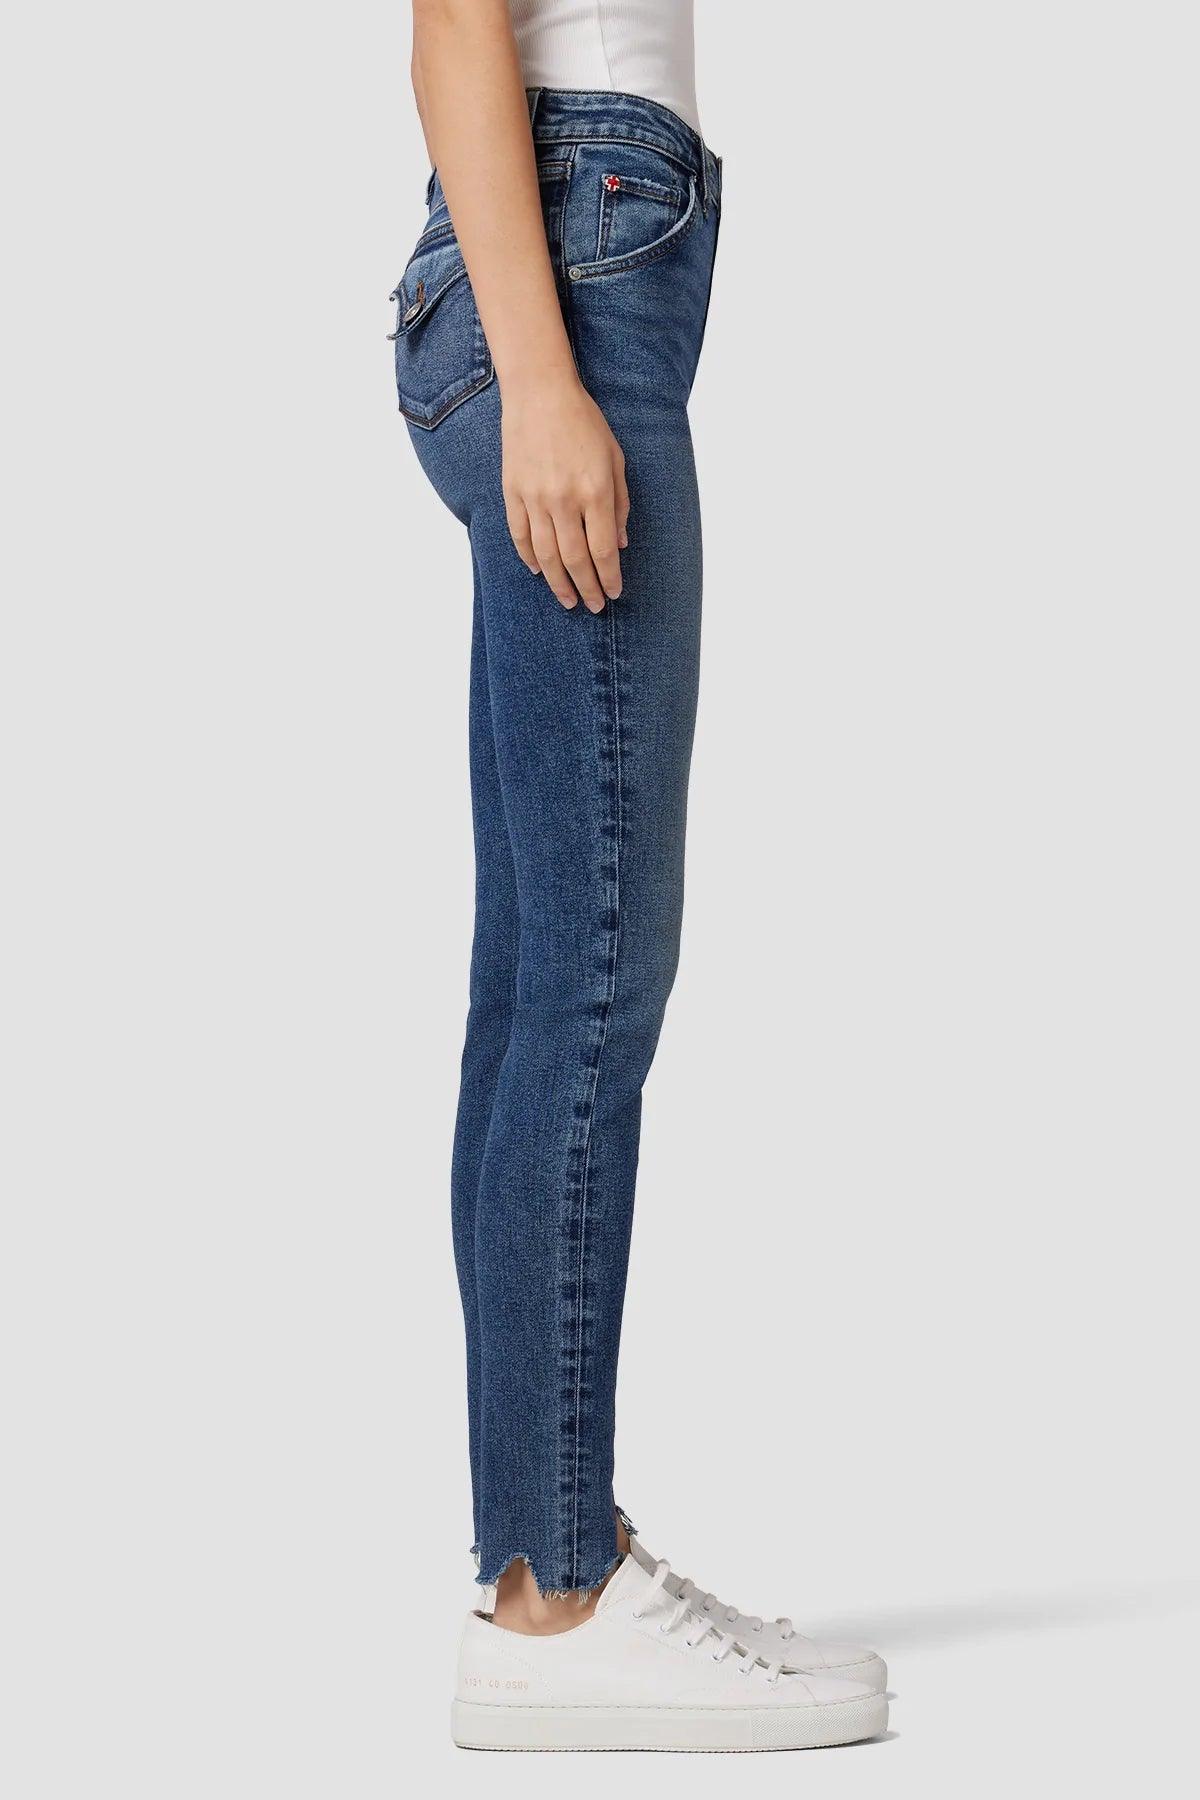 Collin High Rise Skinny Jean by Hudson - Haven